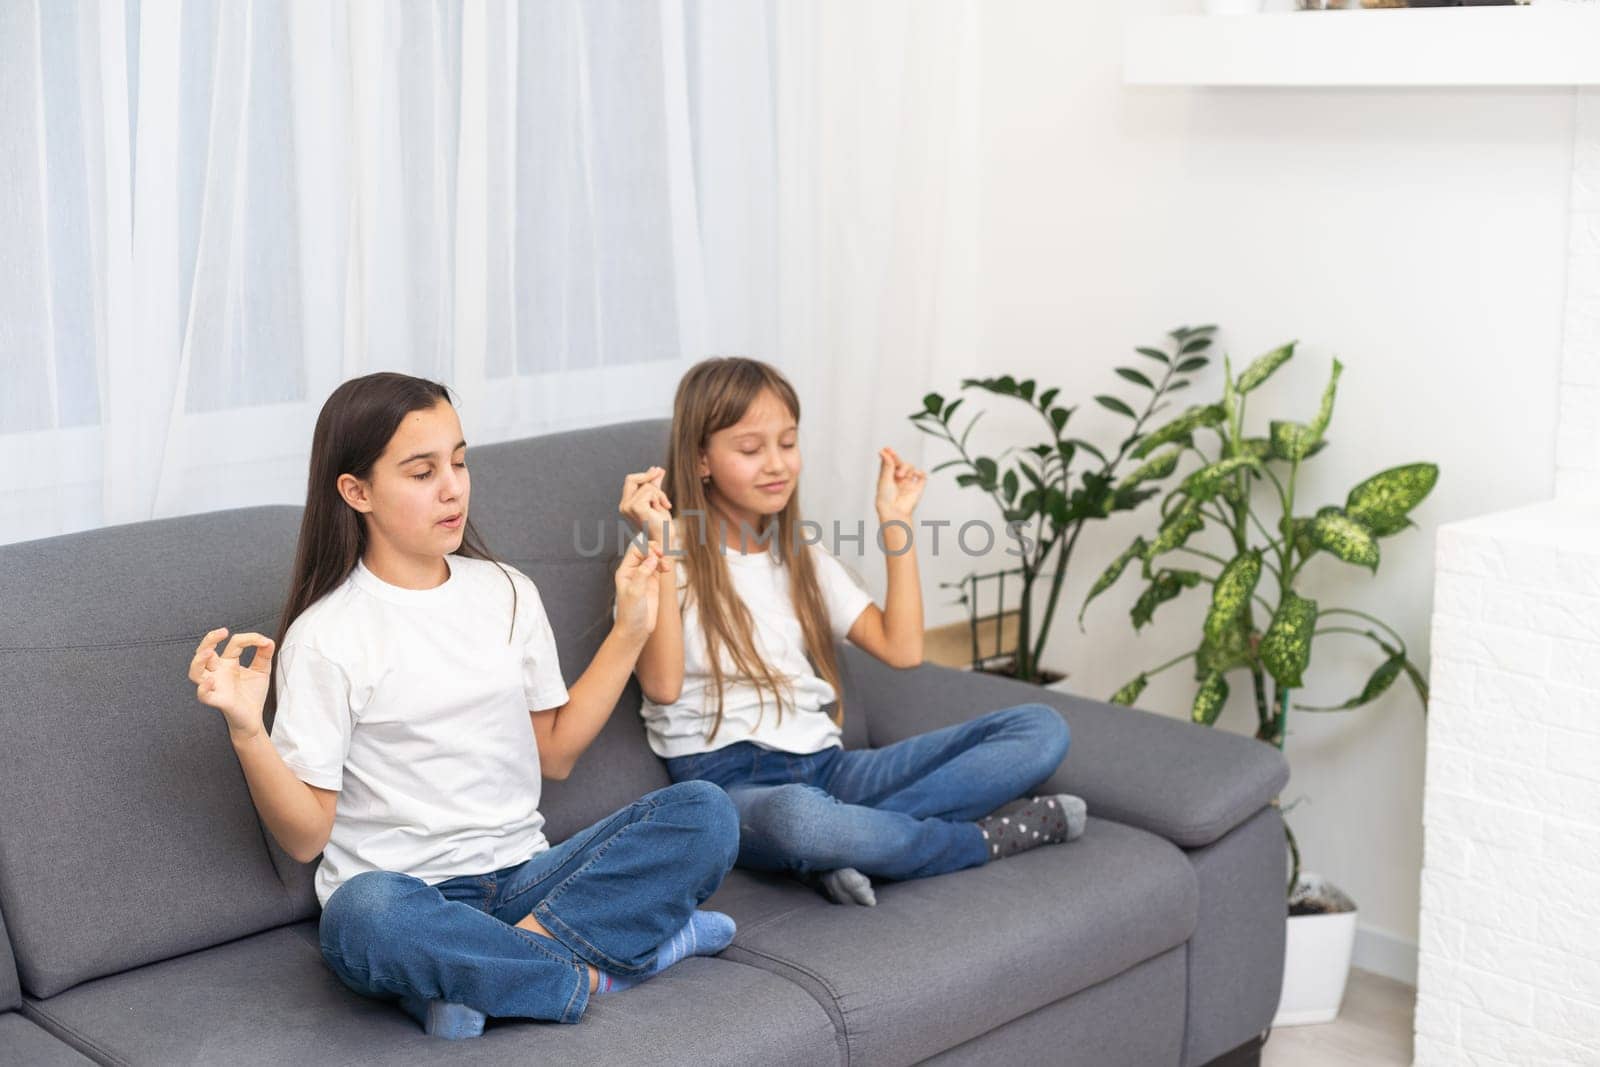 People, relationships, family, relaxation, yoga and meditation concept. girls sitting on bed, looking up, making mudra gesture, praying or meditating by Andelov13